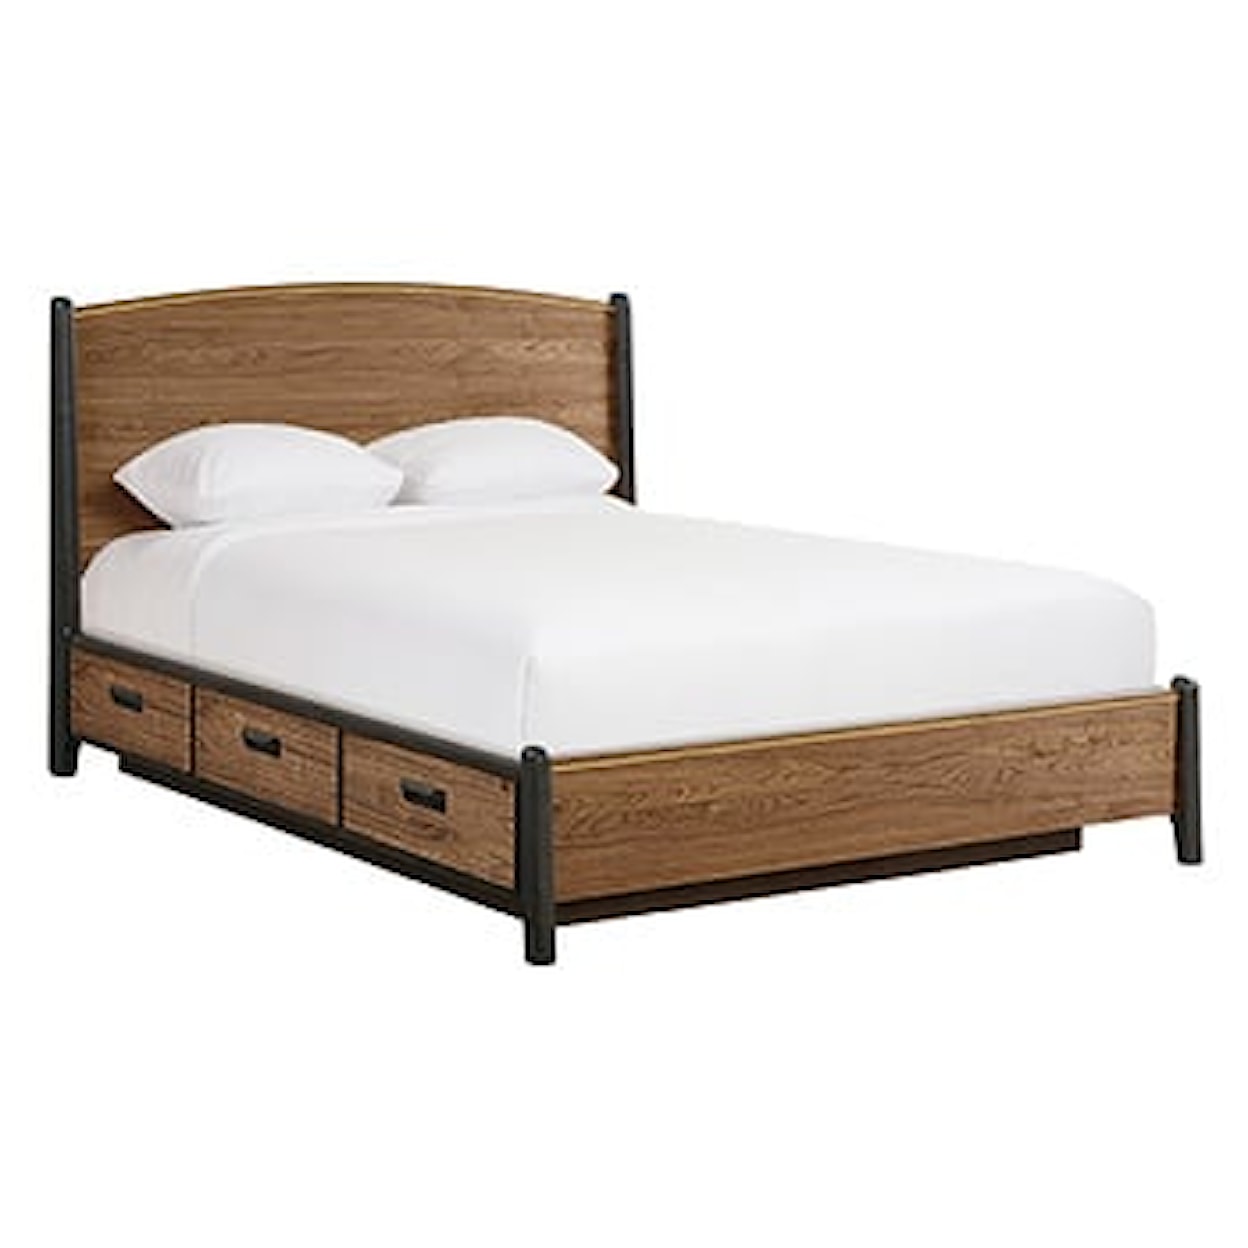 Whittier Wood Bryce Queen Curved Panel Storage Bed